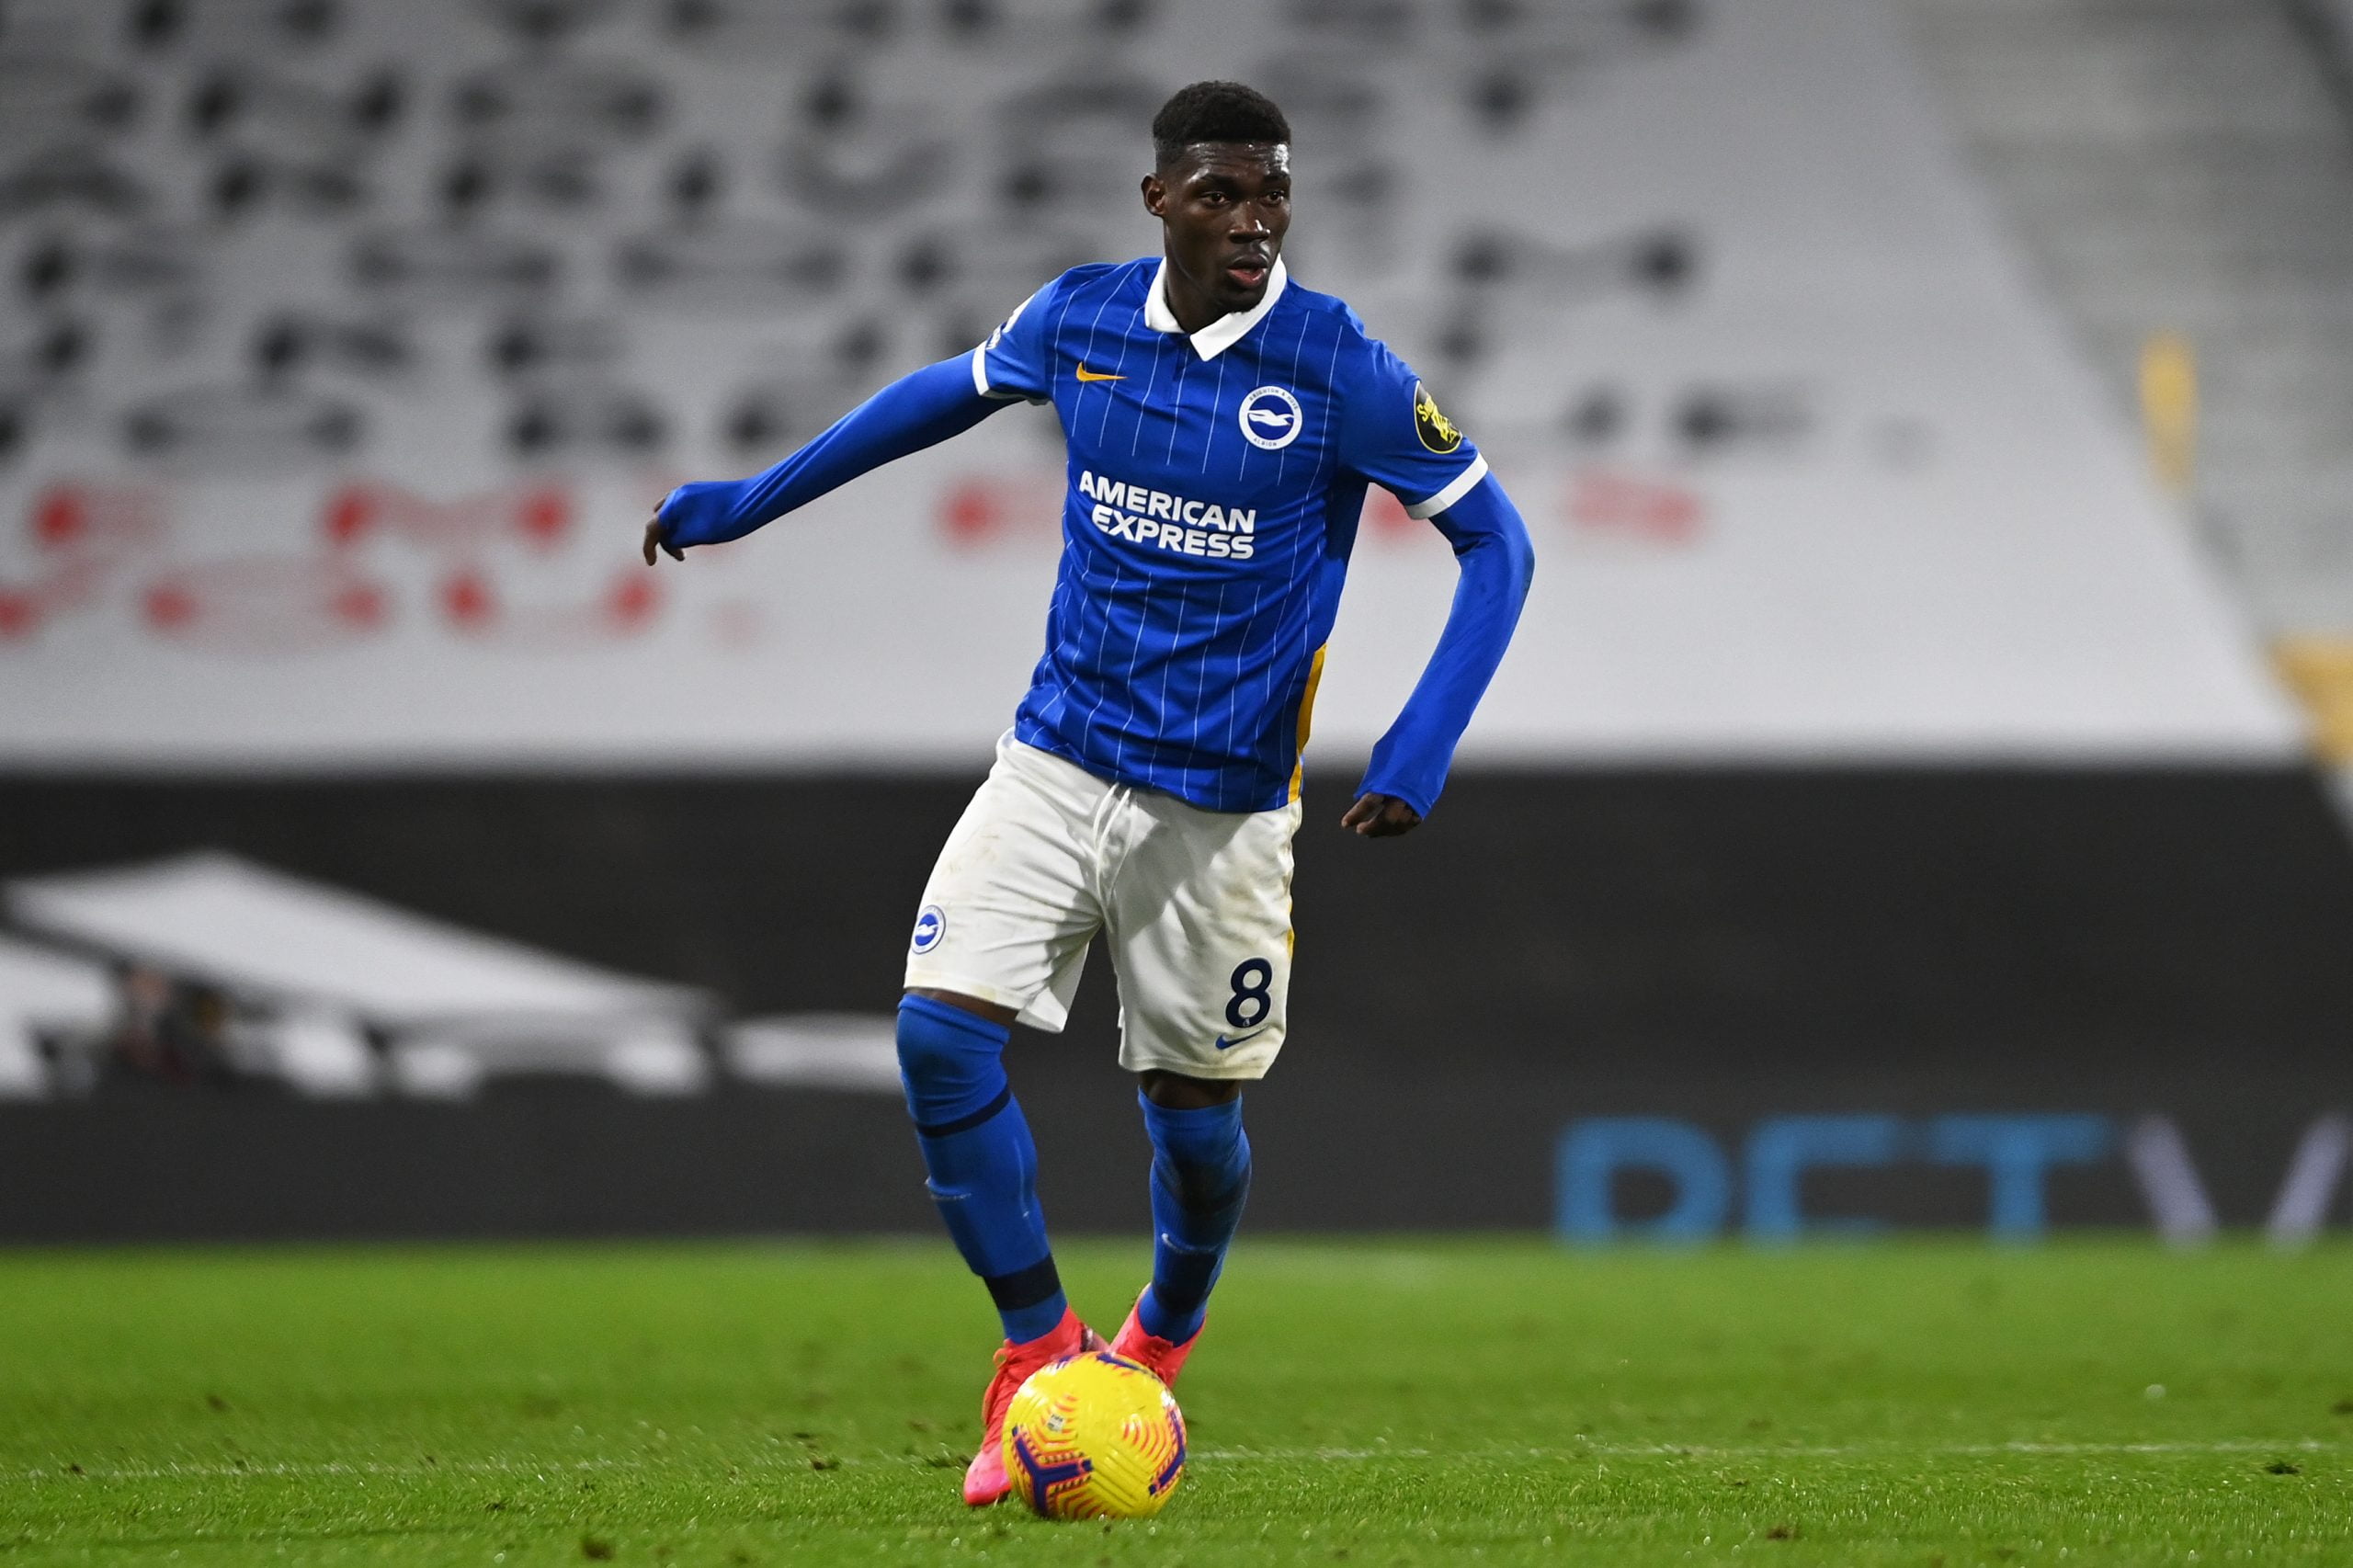 Brighton midfielder Yves Bissouma is on Arsenal's radar (Bissouma is in action in the picture)